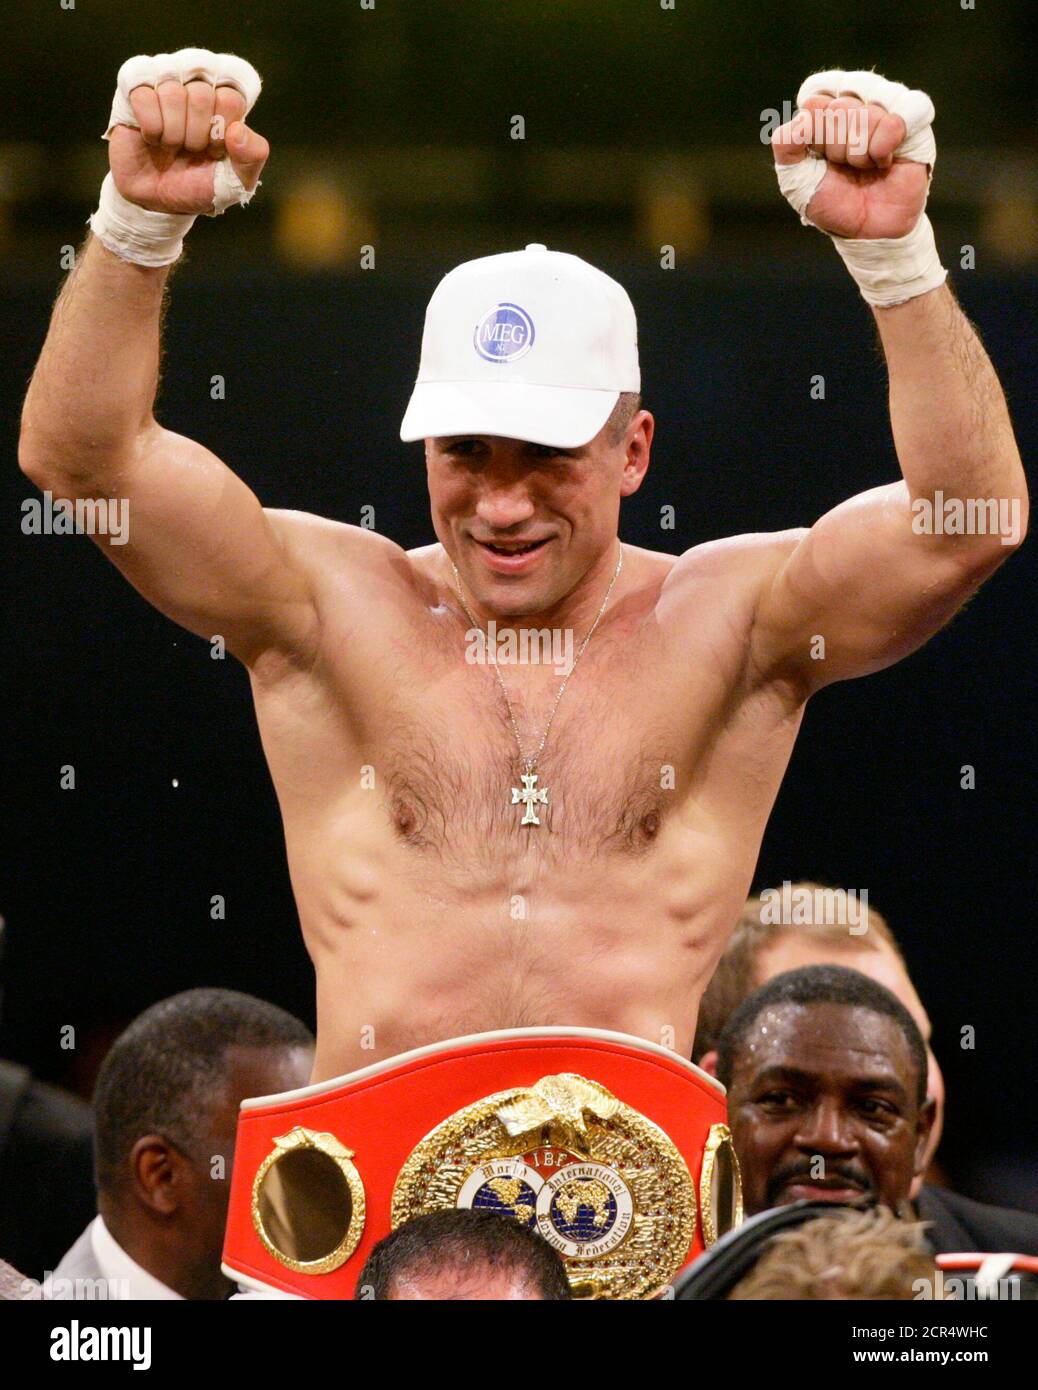 Ibf Middleweight World Champion High Resolution Stock Photography and  Images - Alamy